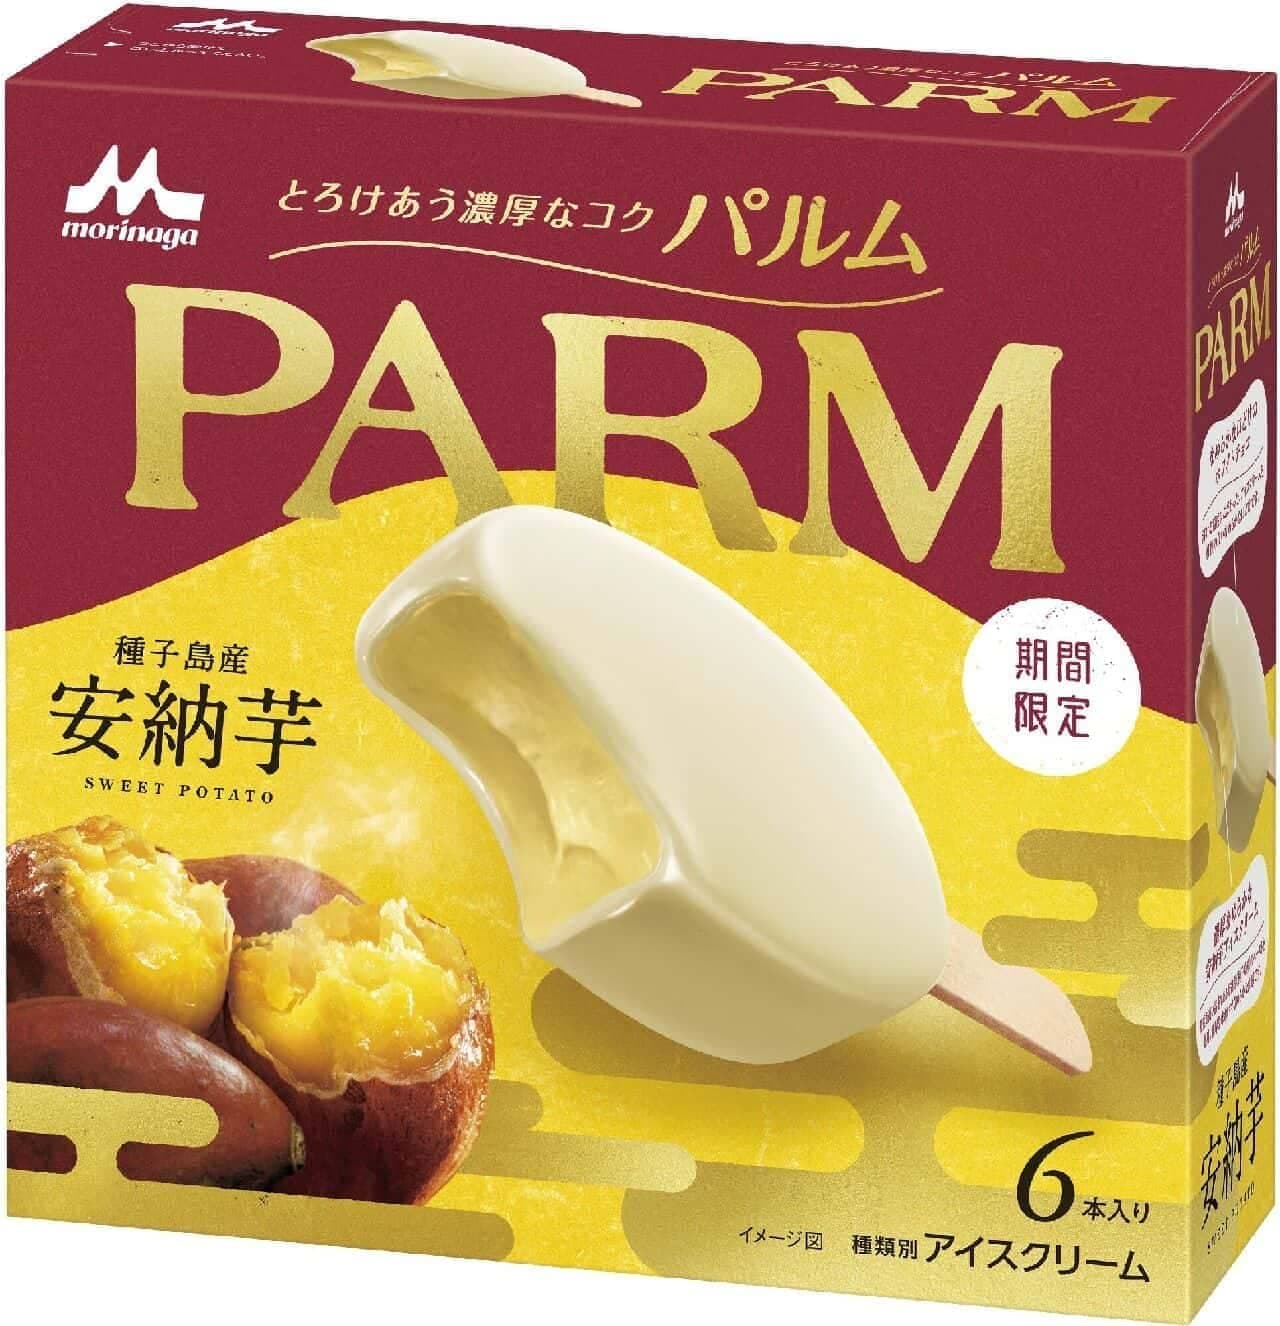 Morinaga Milk Industry "PARM Anno sweet potato" limited time only